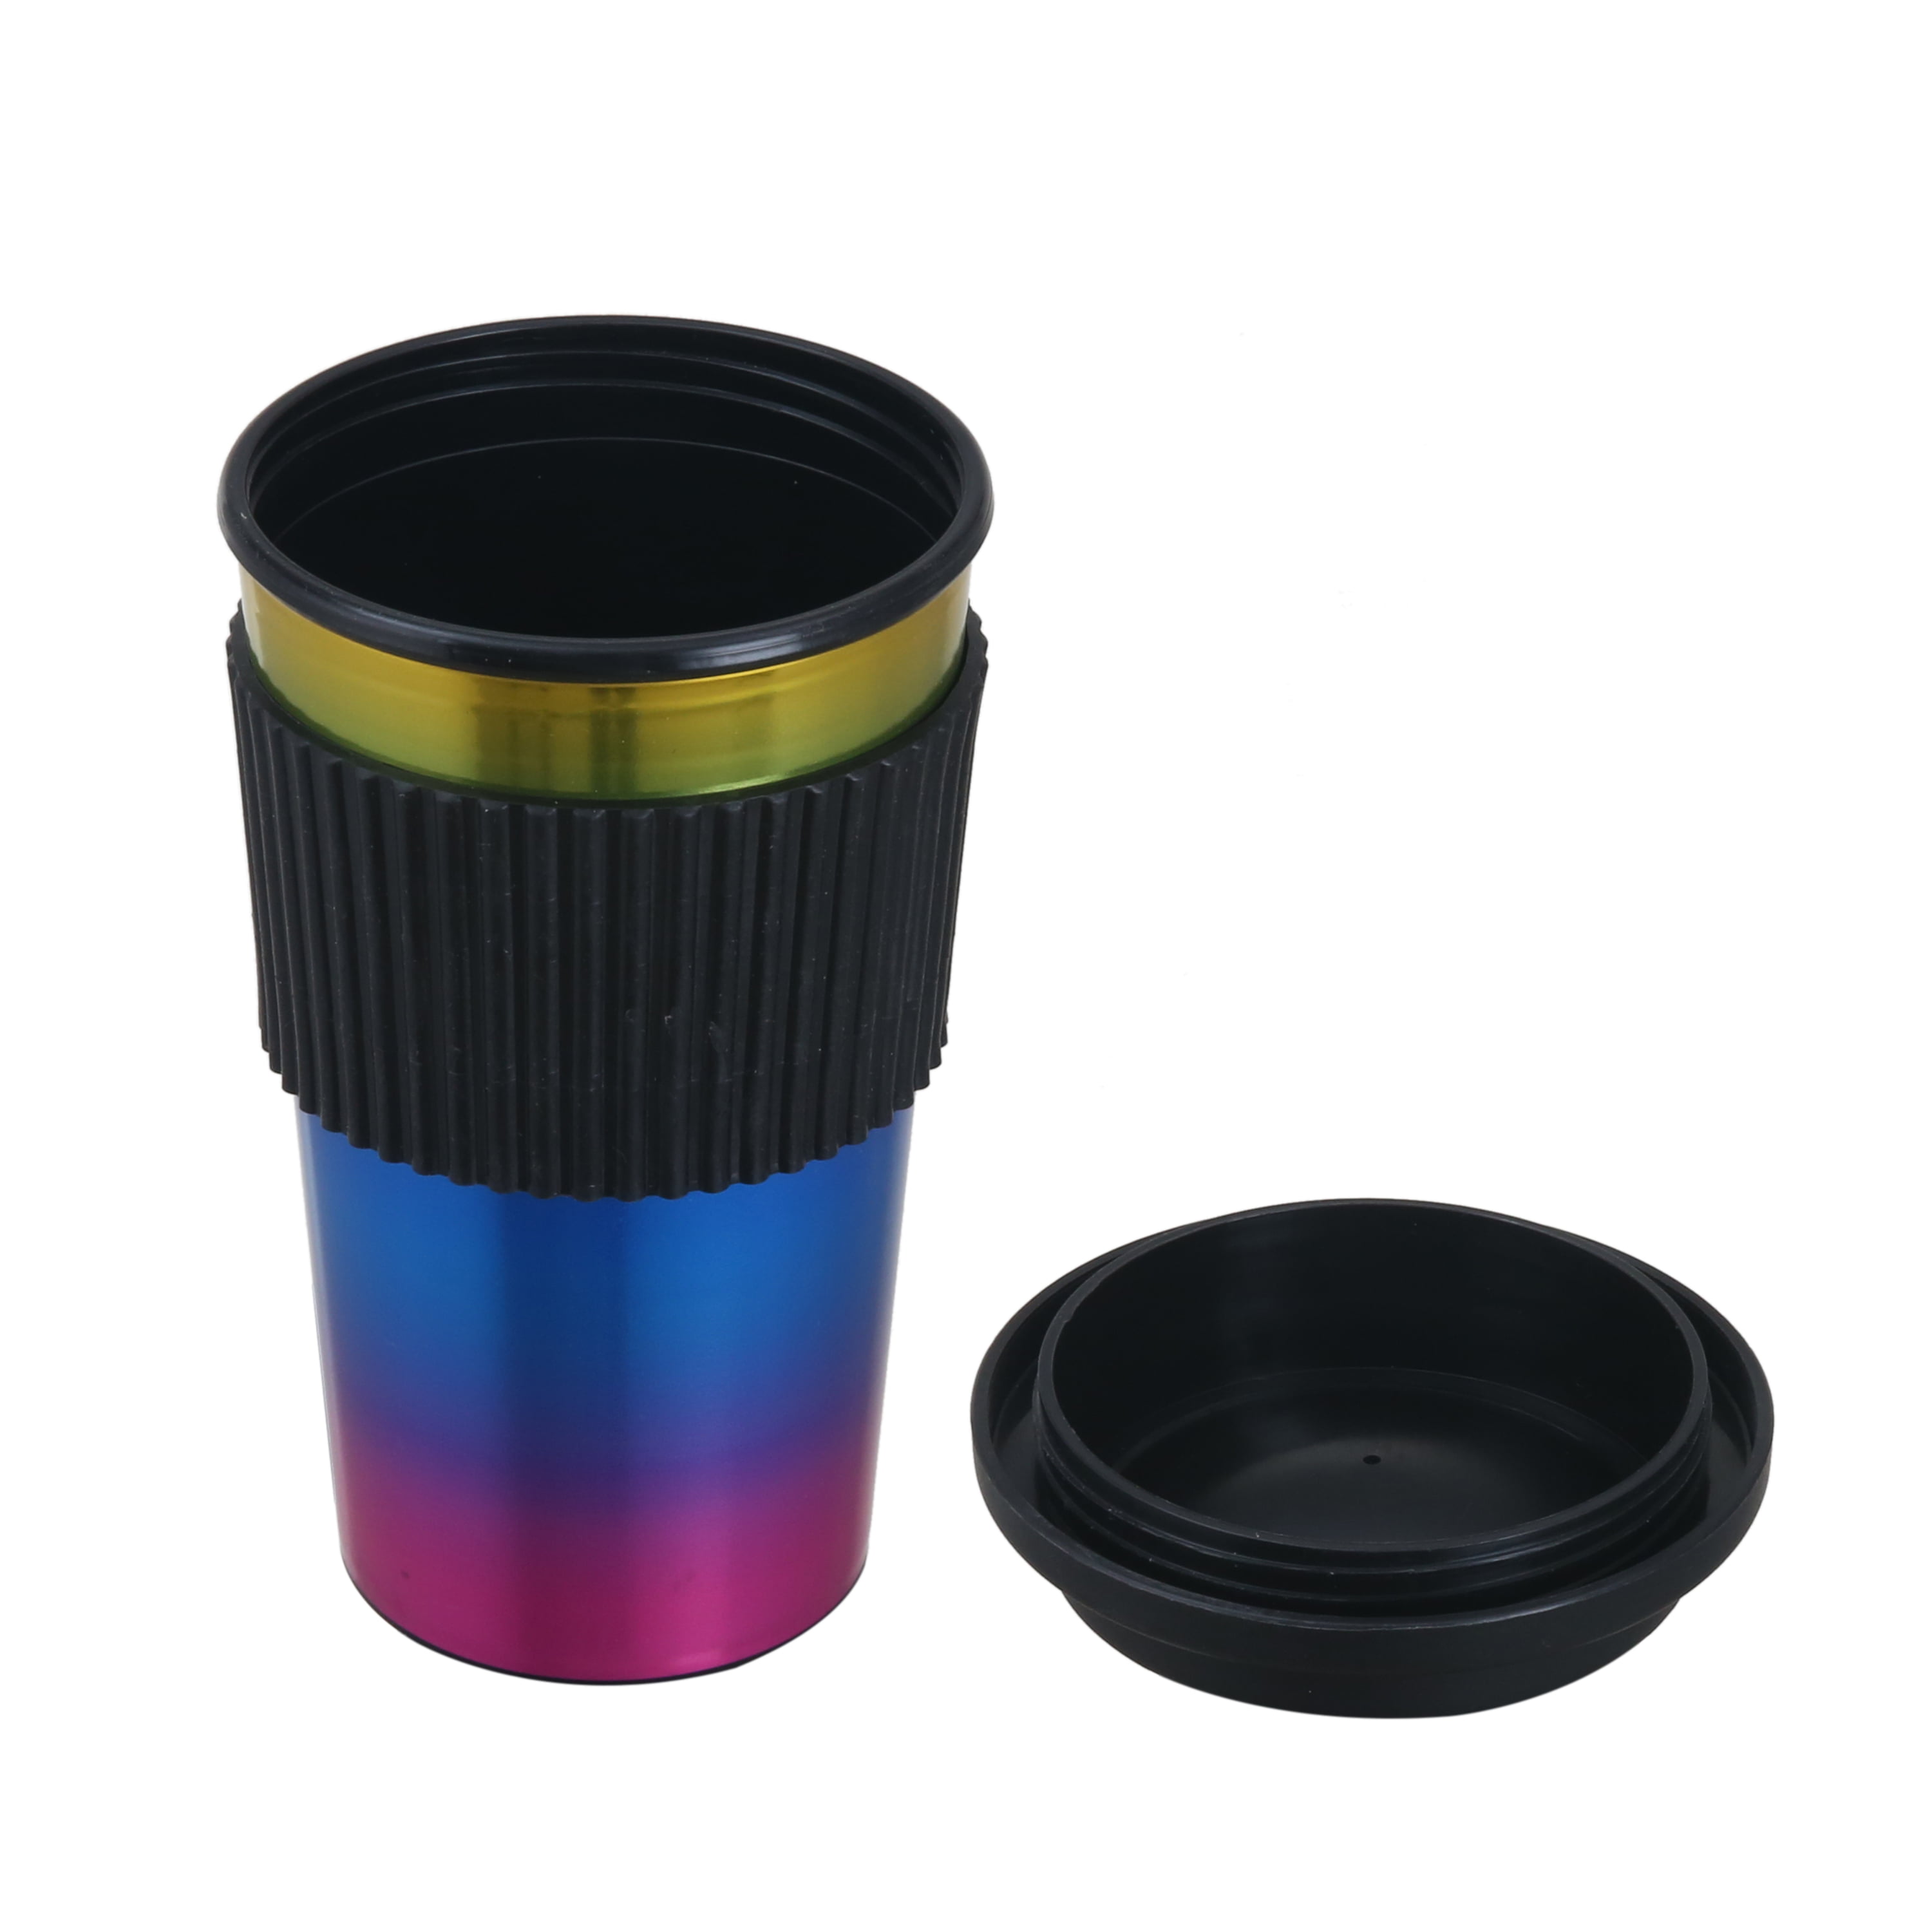 Mainstays 18 oz. Travel Cup with Ribbed Soft Grip, Single Cup